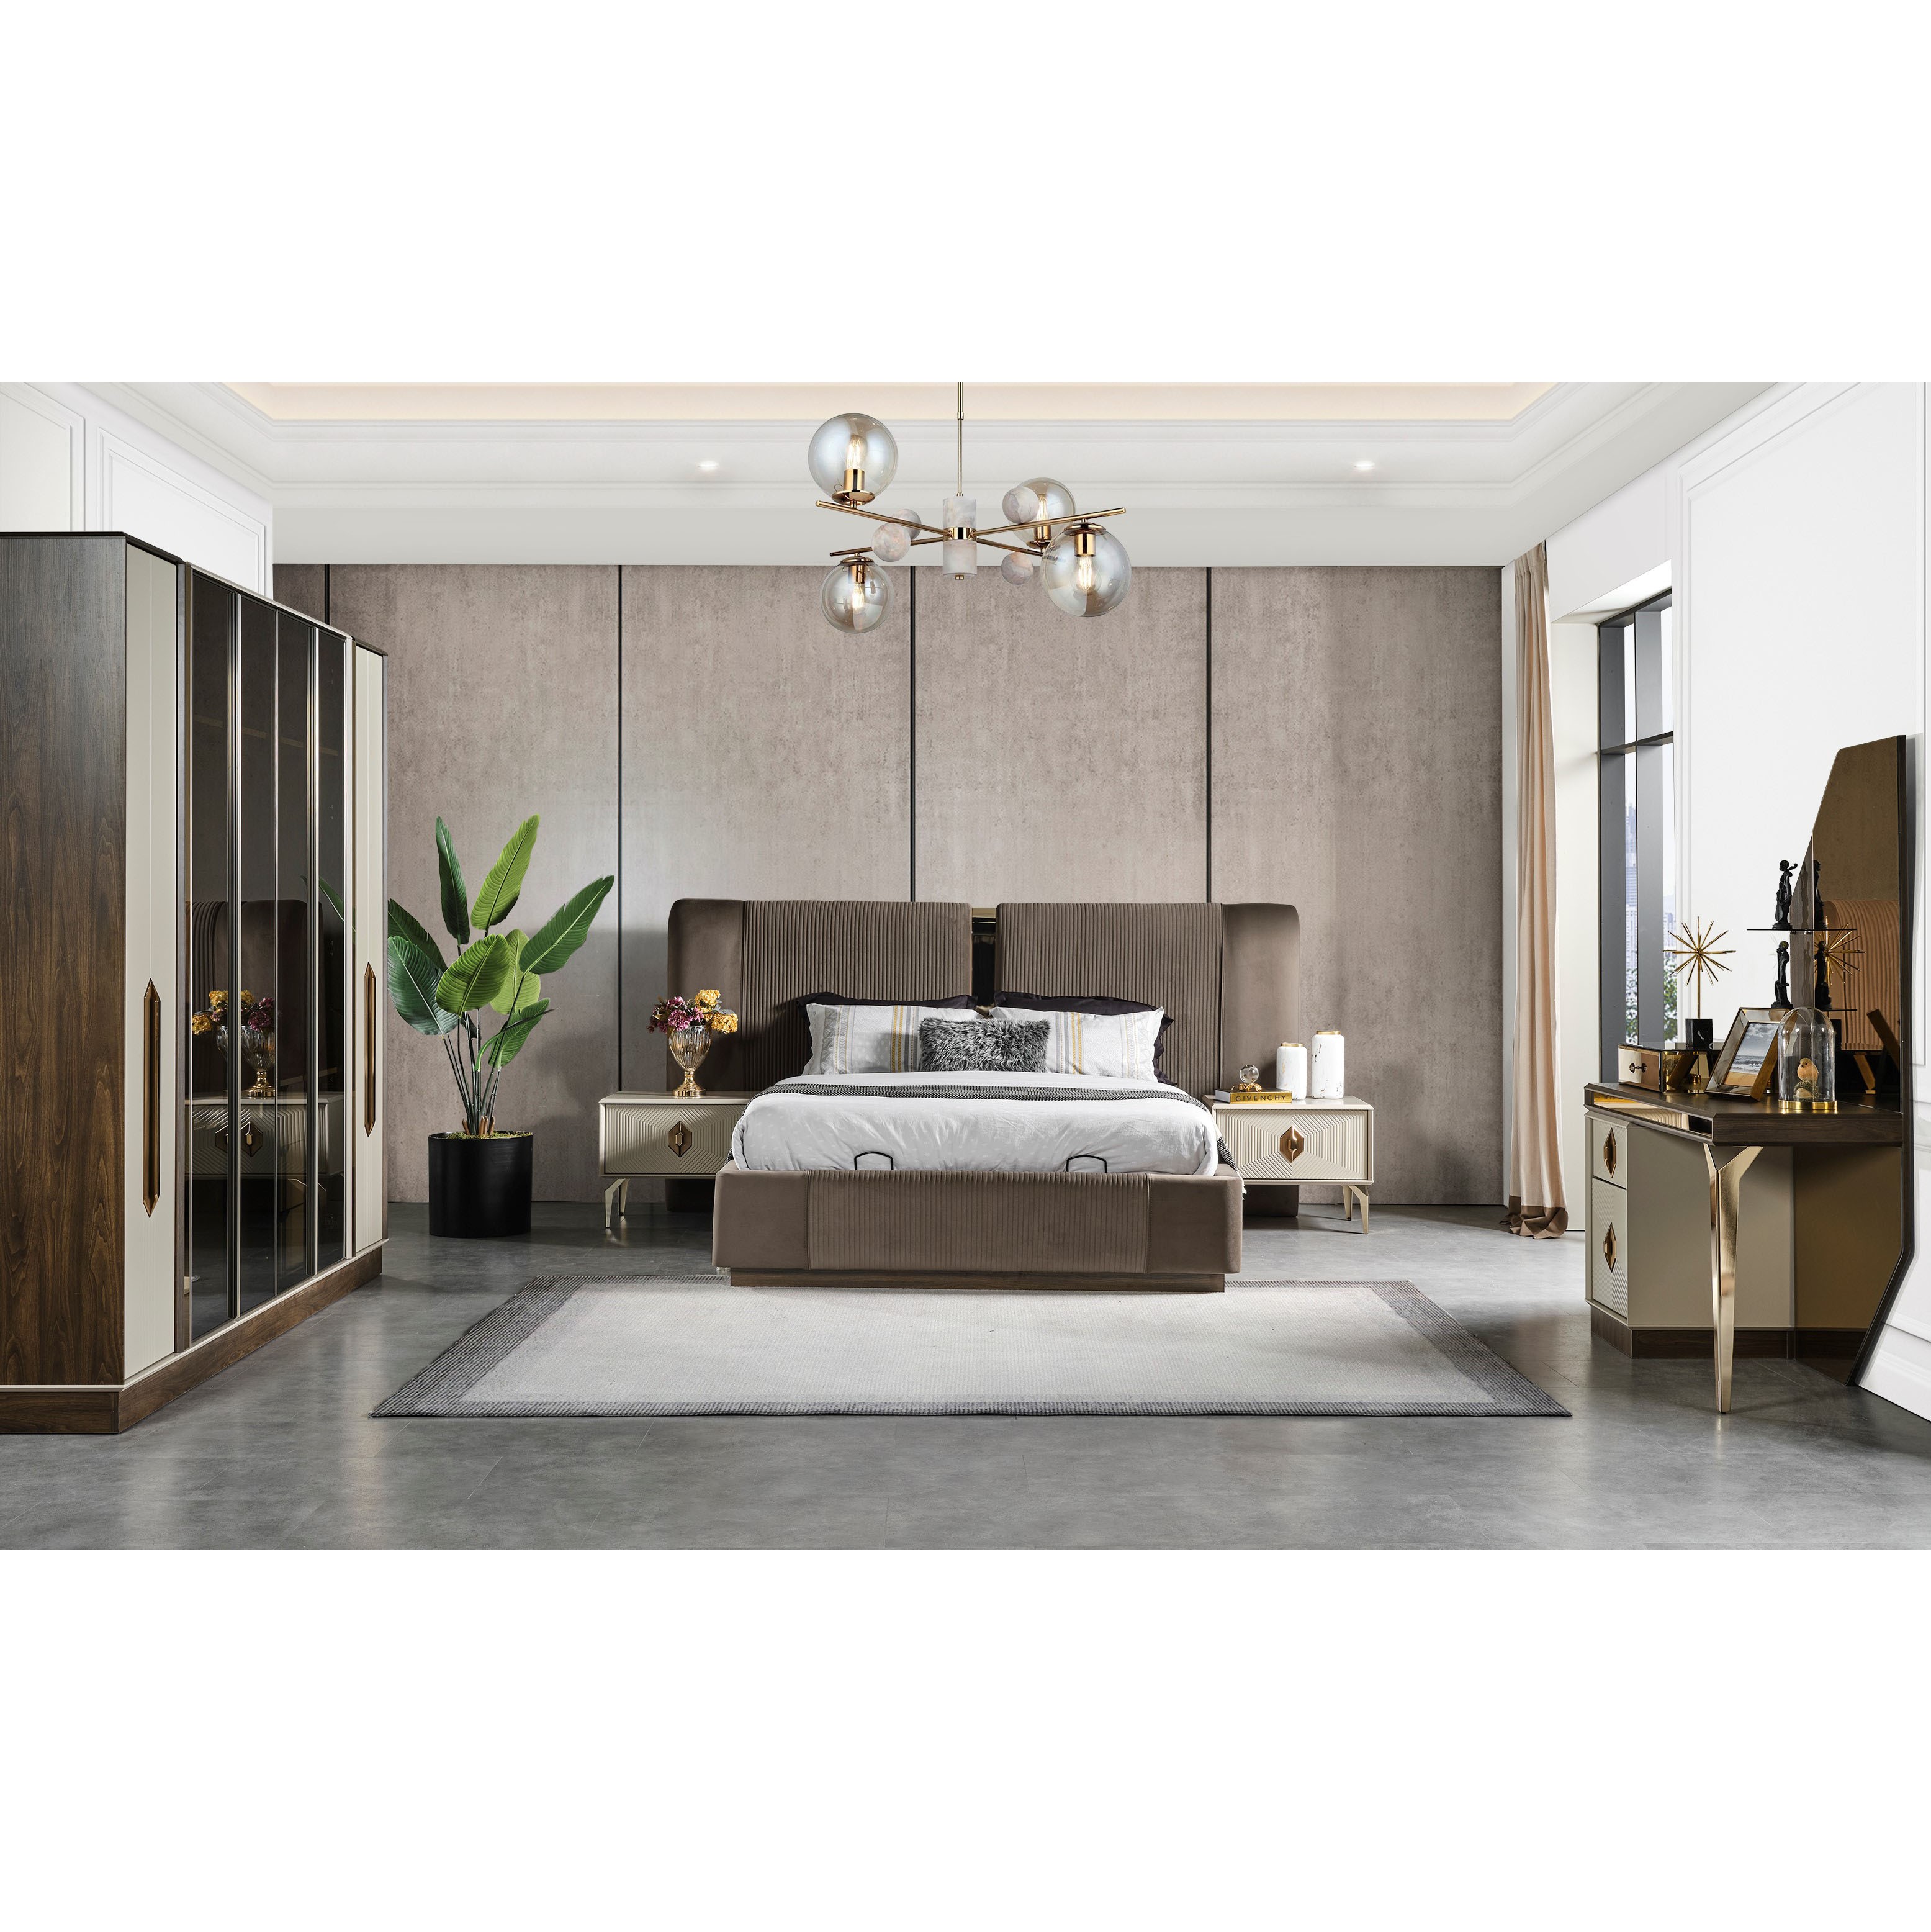 Trend Bedroom (Bed Without Storage 180x200 cm)